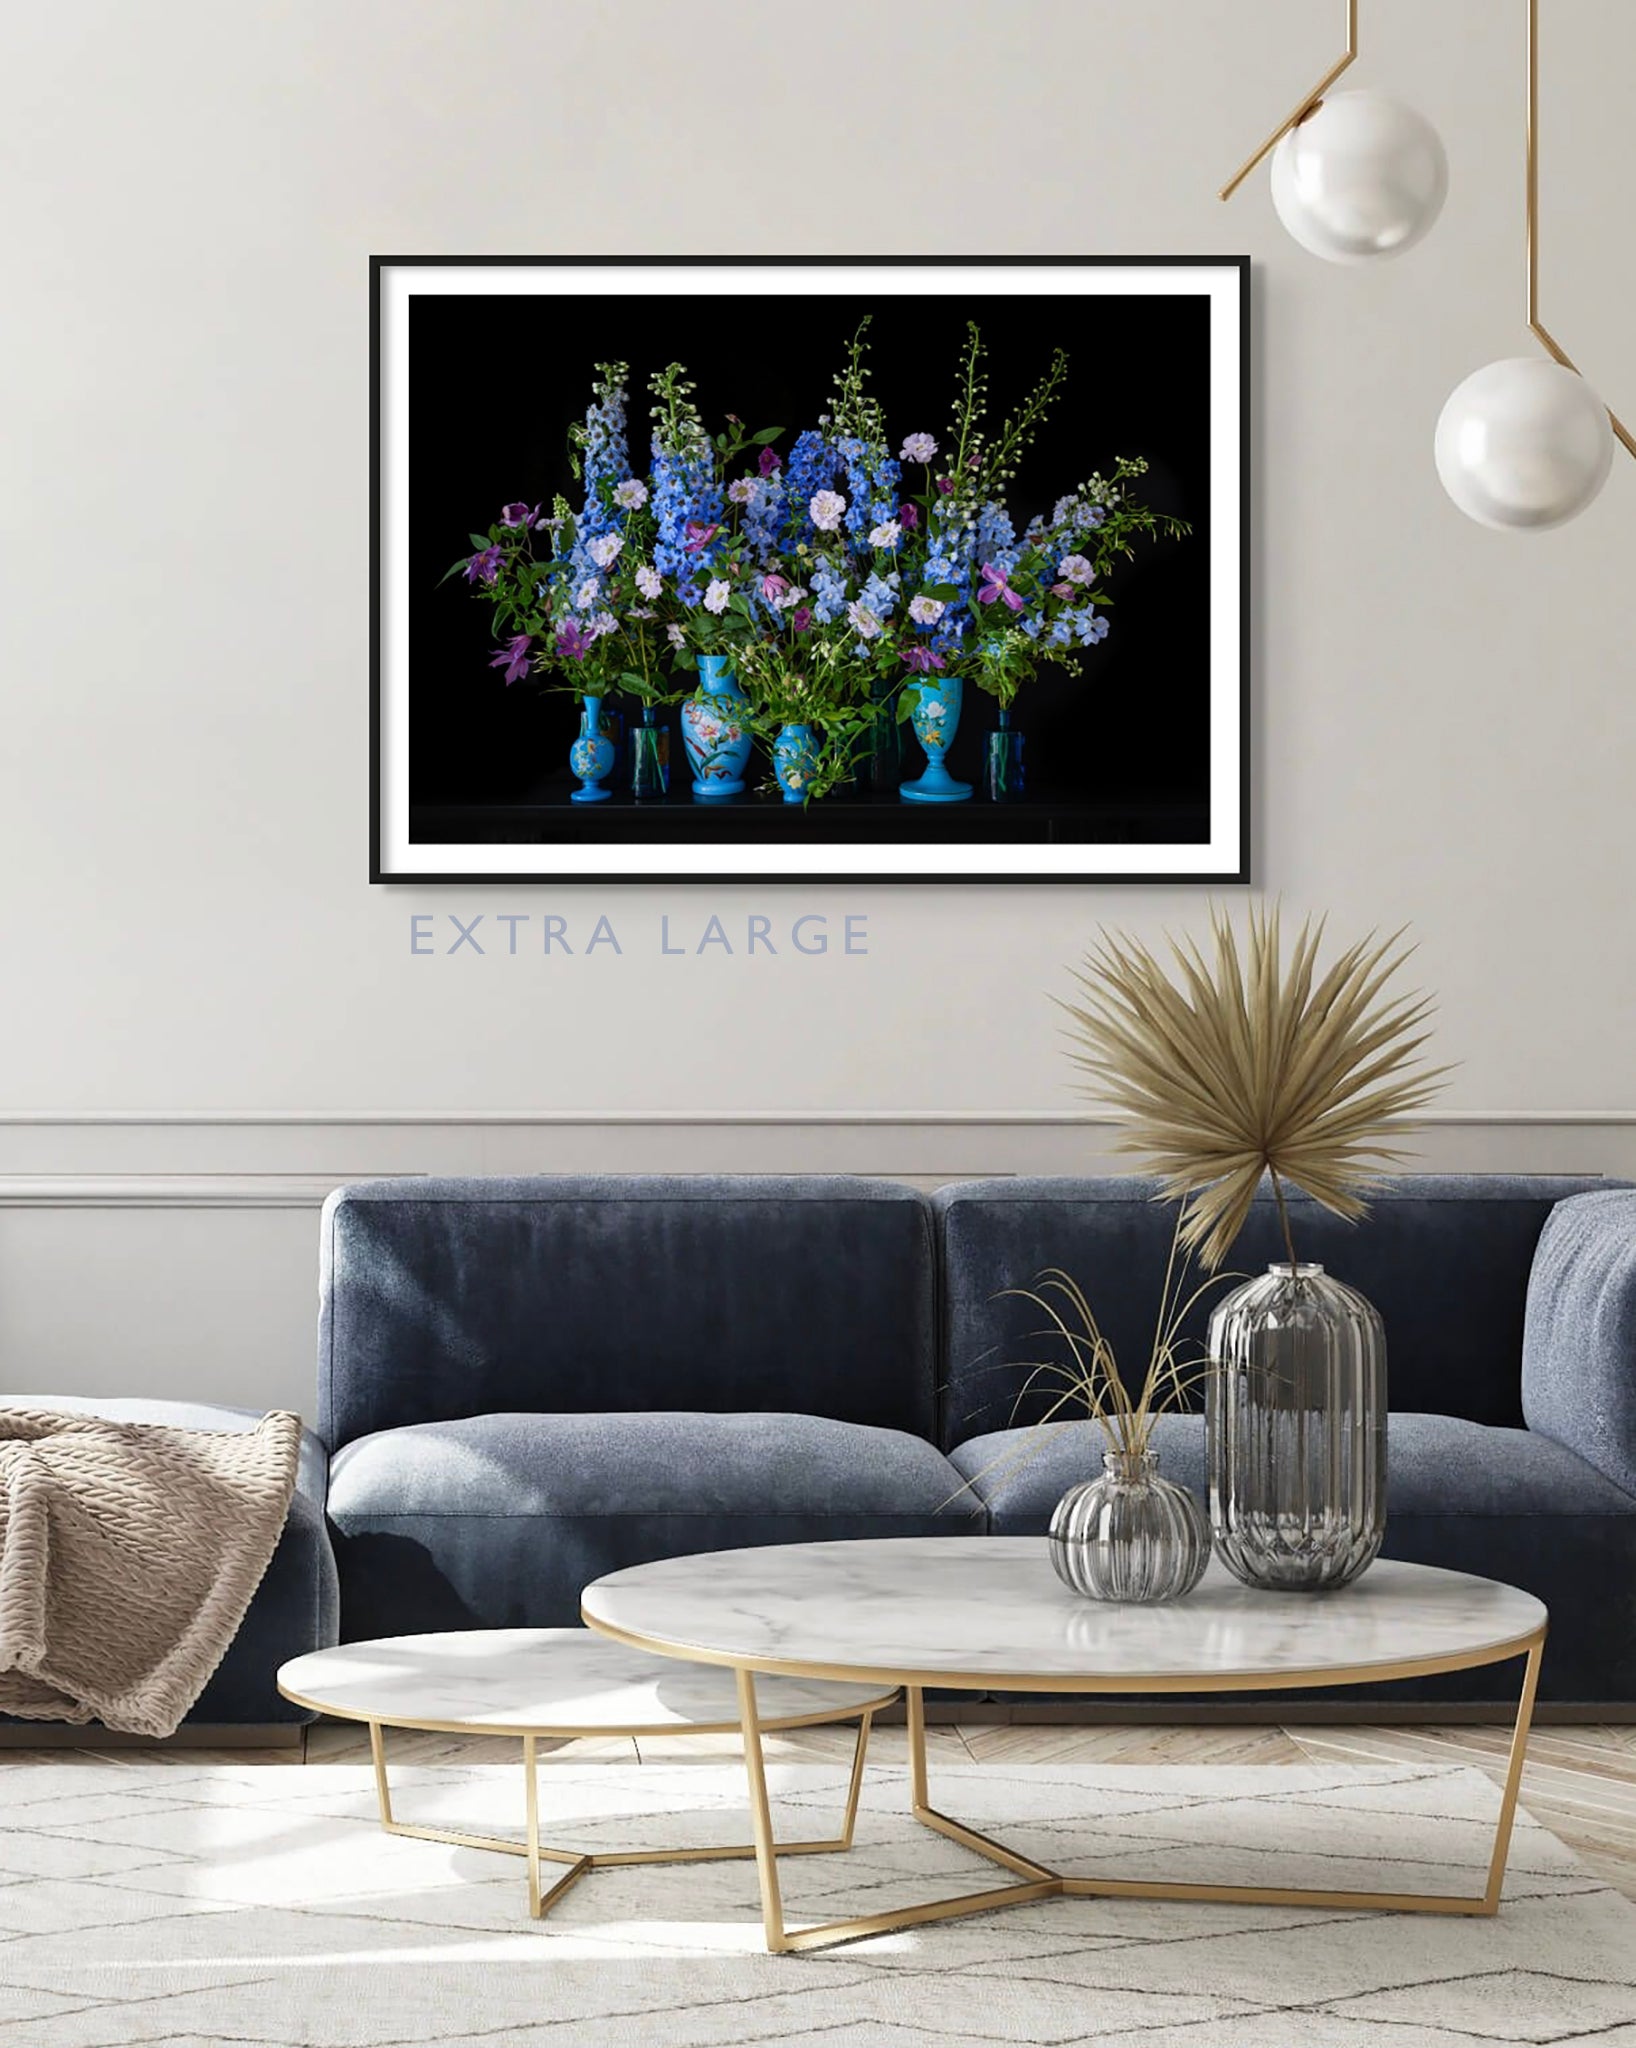 Size guide - Interior picture of Extra Large 'DELPHINE' Limited Edition Fine Art Photographic Print Framed displayed on white wall above a blue velvet sofa in a sophisticated sitting room.